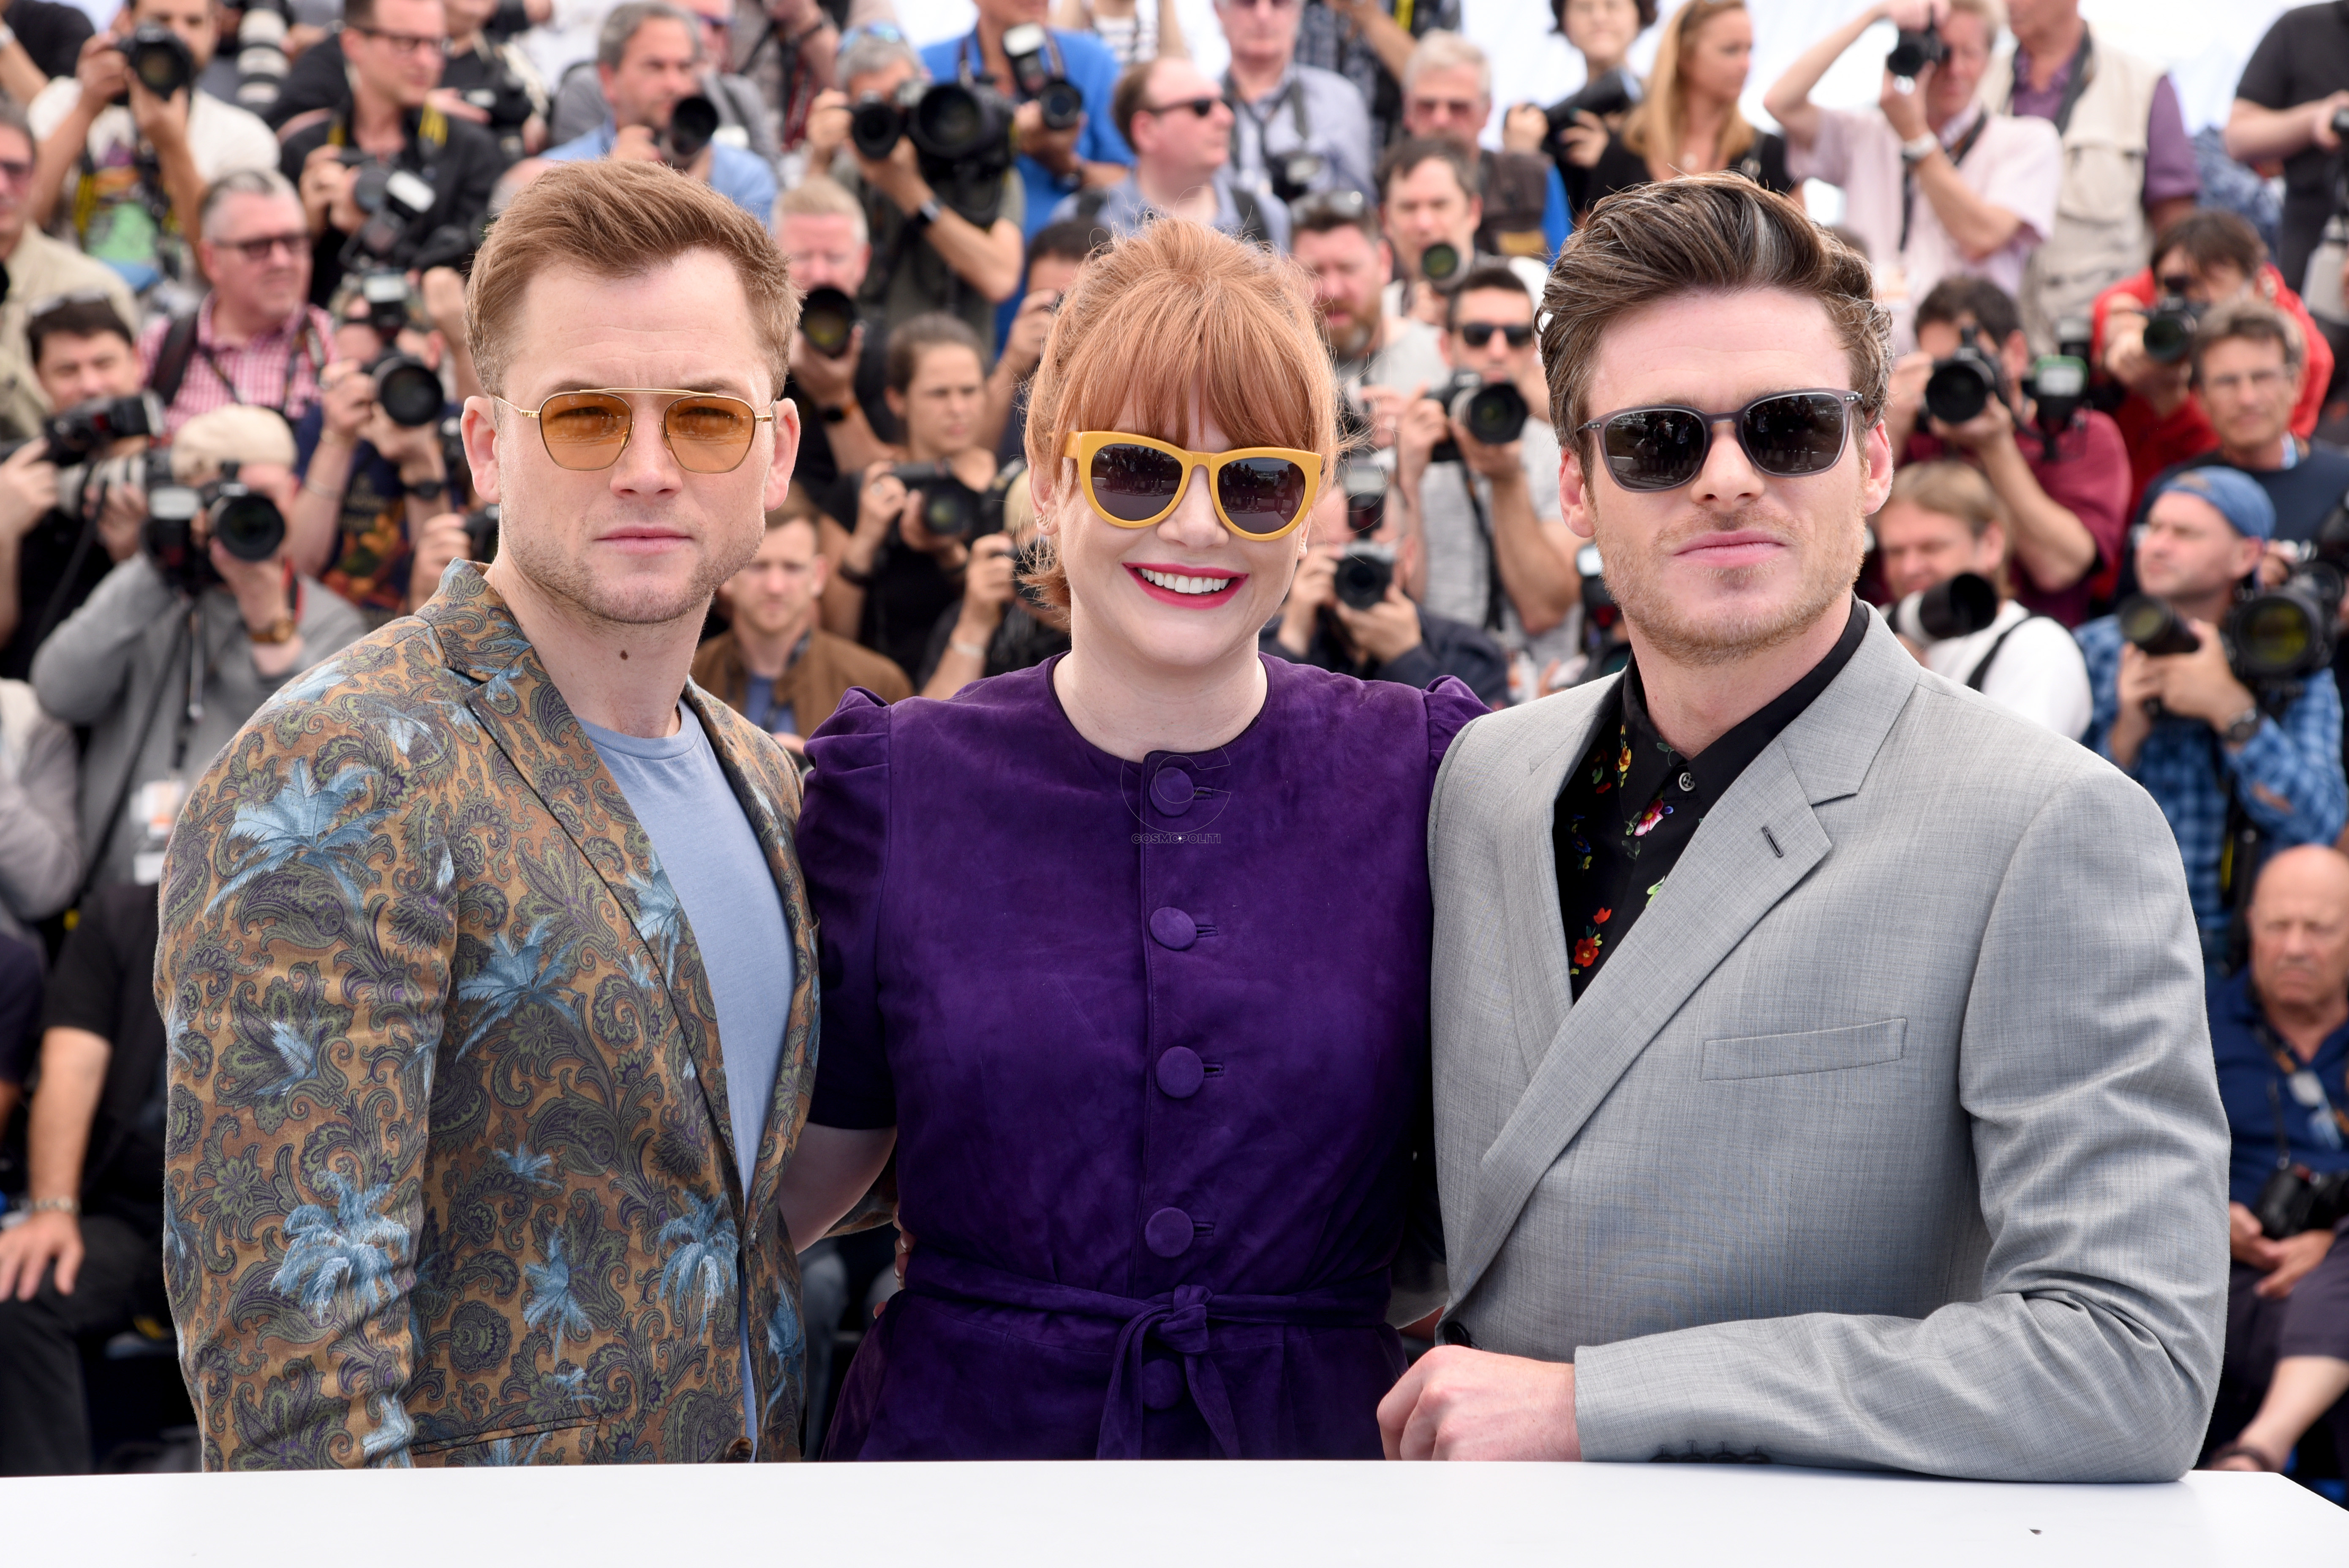 CANNES, FRANCE  - MAY 16: (L-R) Taron Egerton, Bryce Dallas Howard, and Richard Madden attend the "Rocketman" Photocall during the 72nd annual Cannes Film Festival on May 16, 2019 in Cannes, France. (Photo by Serge Arnal/Paramount)